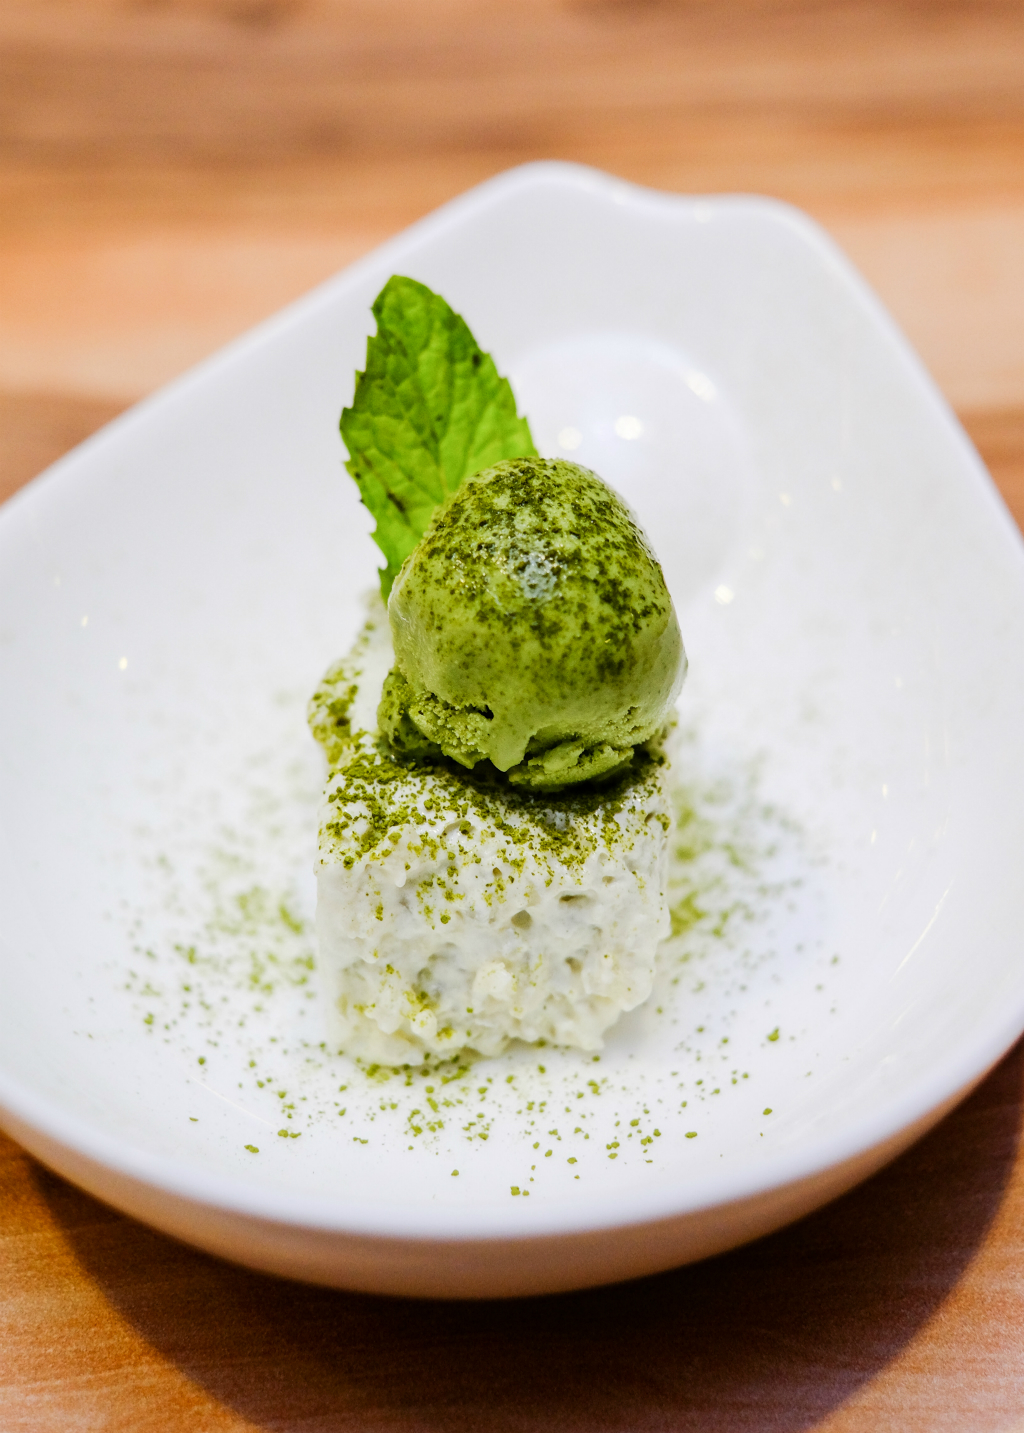 Cho Omakase: smooth and soft rice pudding served with matcha ice cream